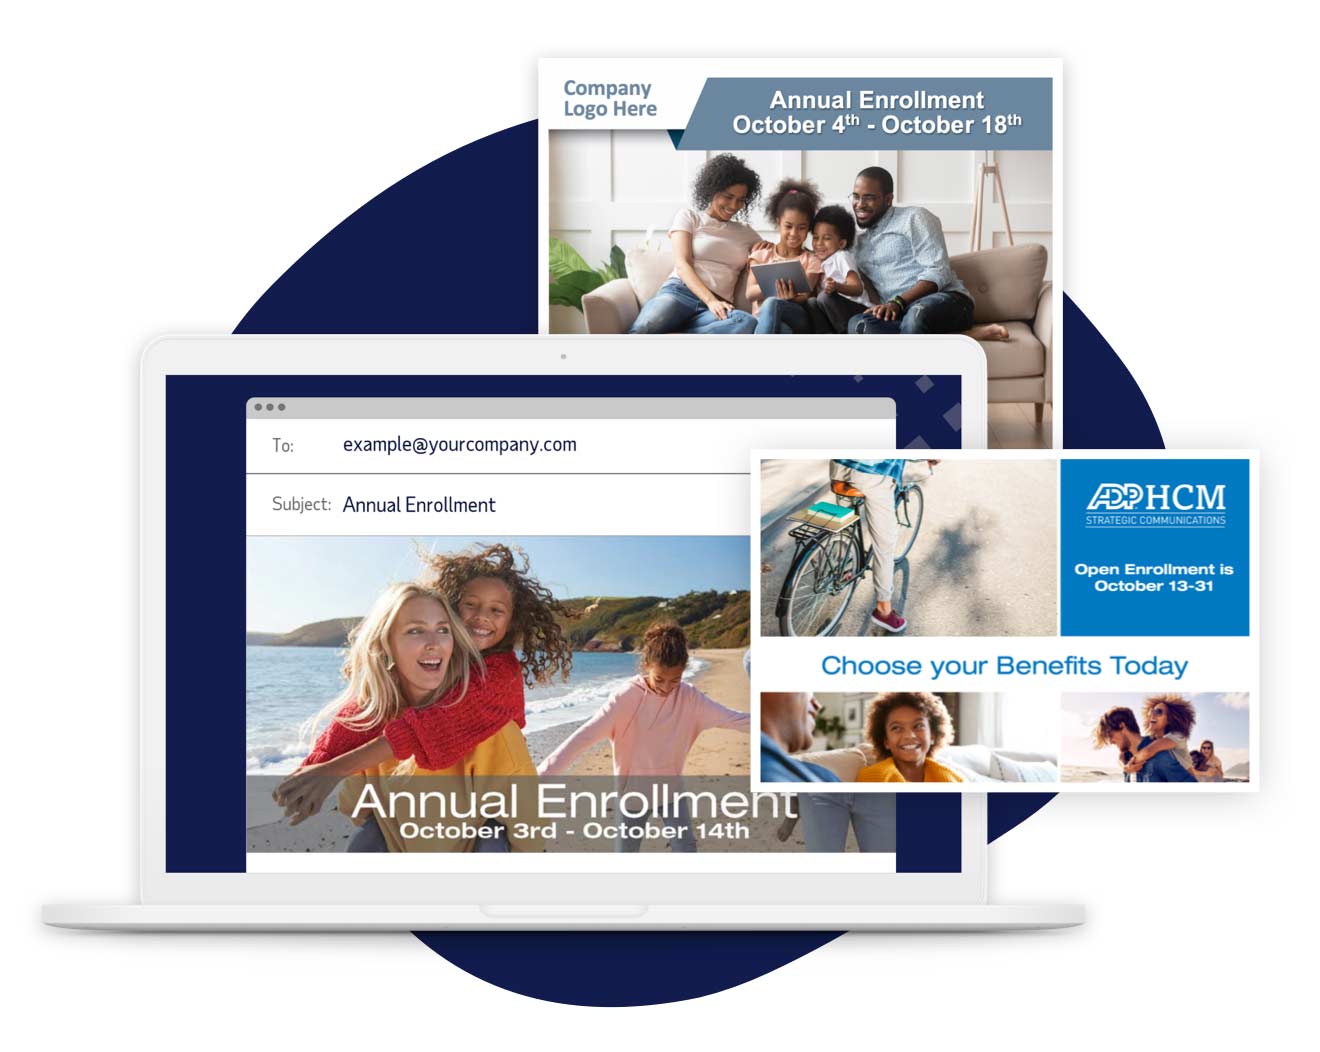 Email communication, flyer, and postcard informing employees of upcoming annual enrollment period